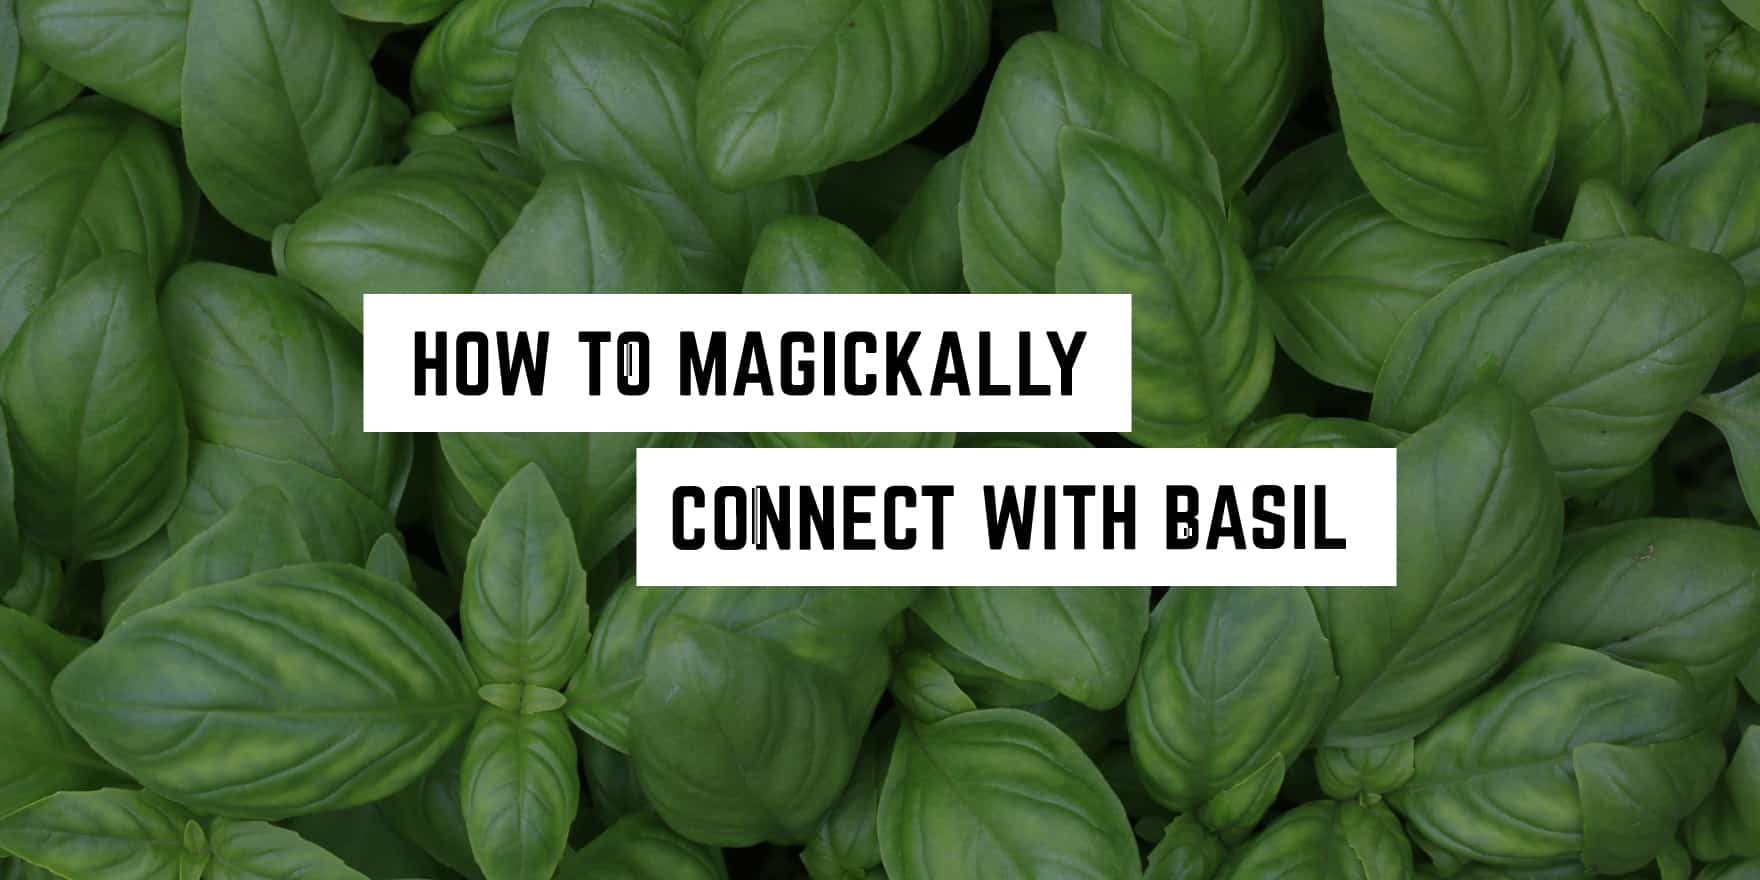 A fresh spread of lush basil leaves with a caption: how to metaphysically connect with basil.